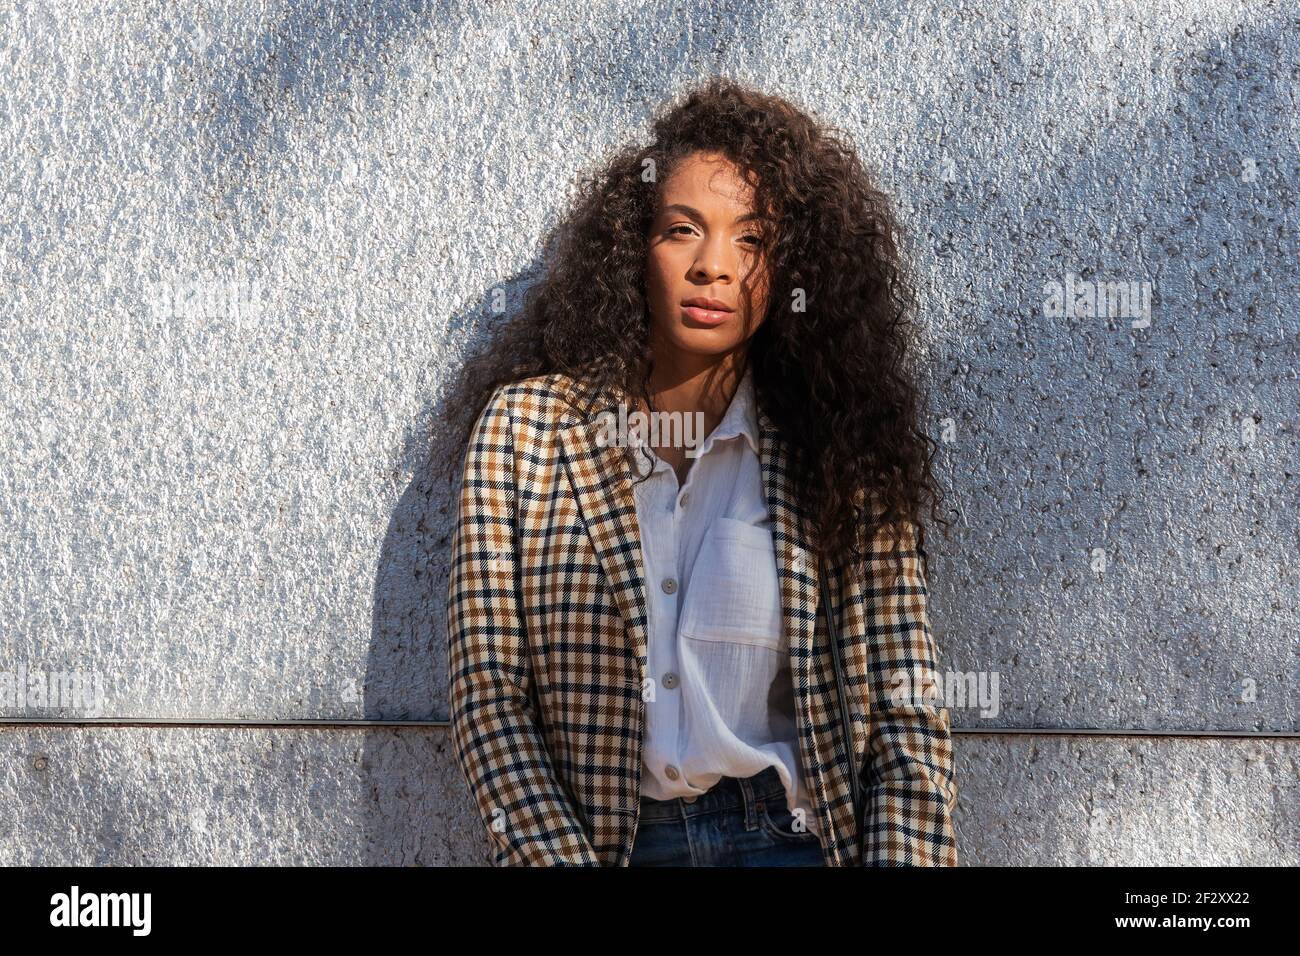 Pensive African American female in trendy outfit with curly hair looking at camera while standing on street near concrete wall Stock Photo